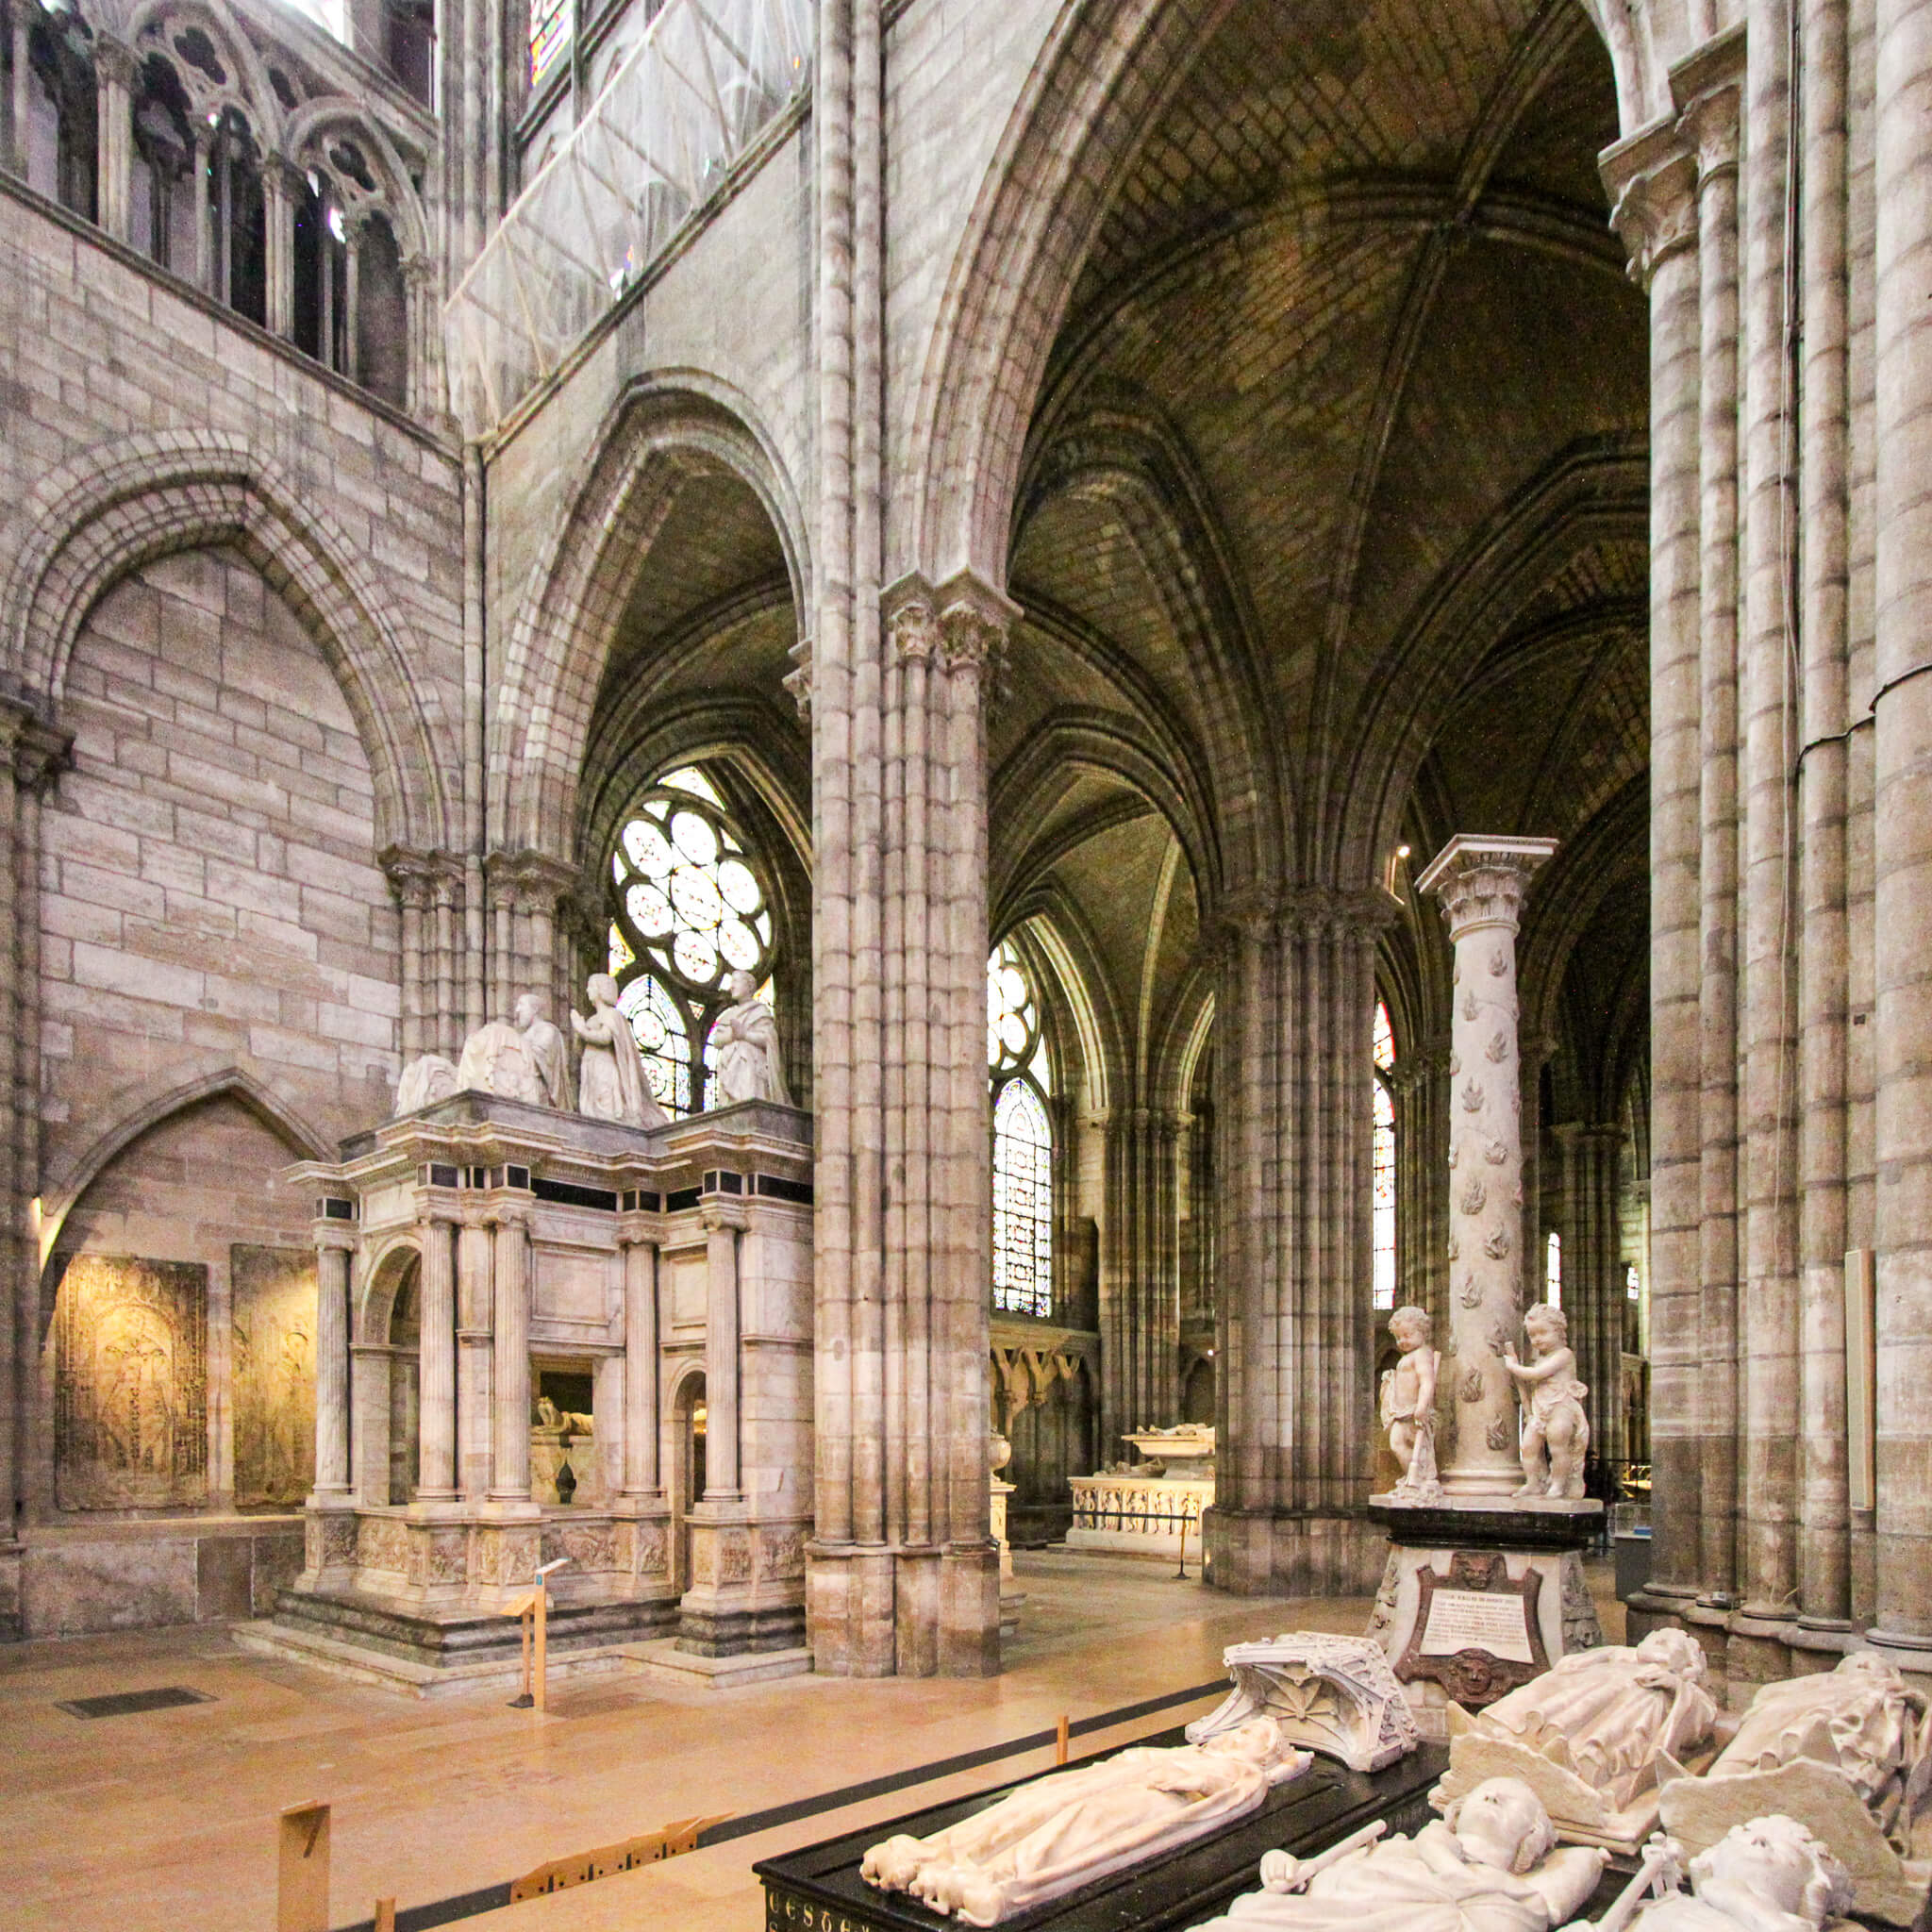 Funeral monuments in the Saint-Denis Basilica